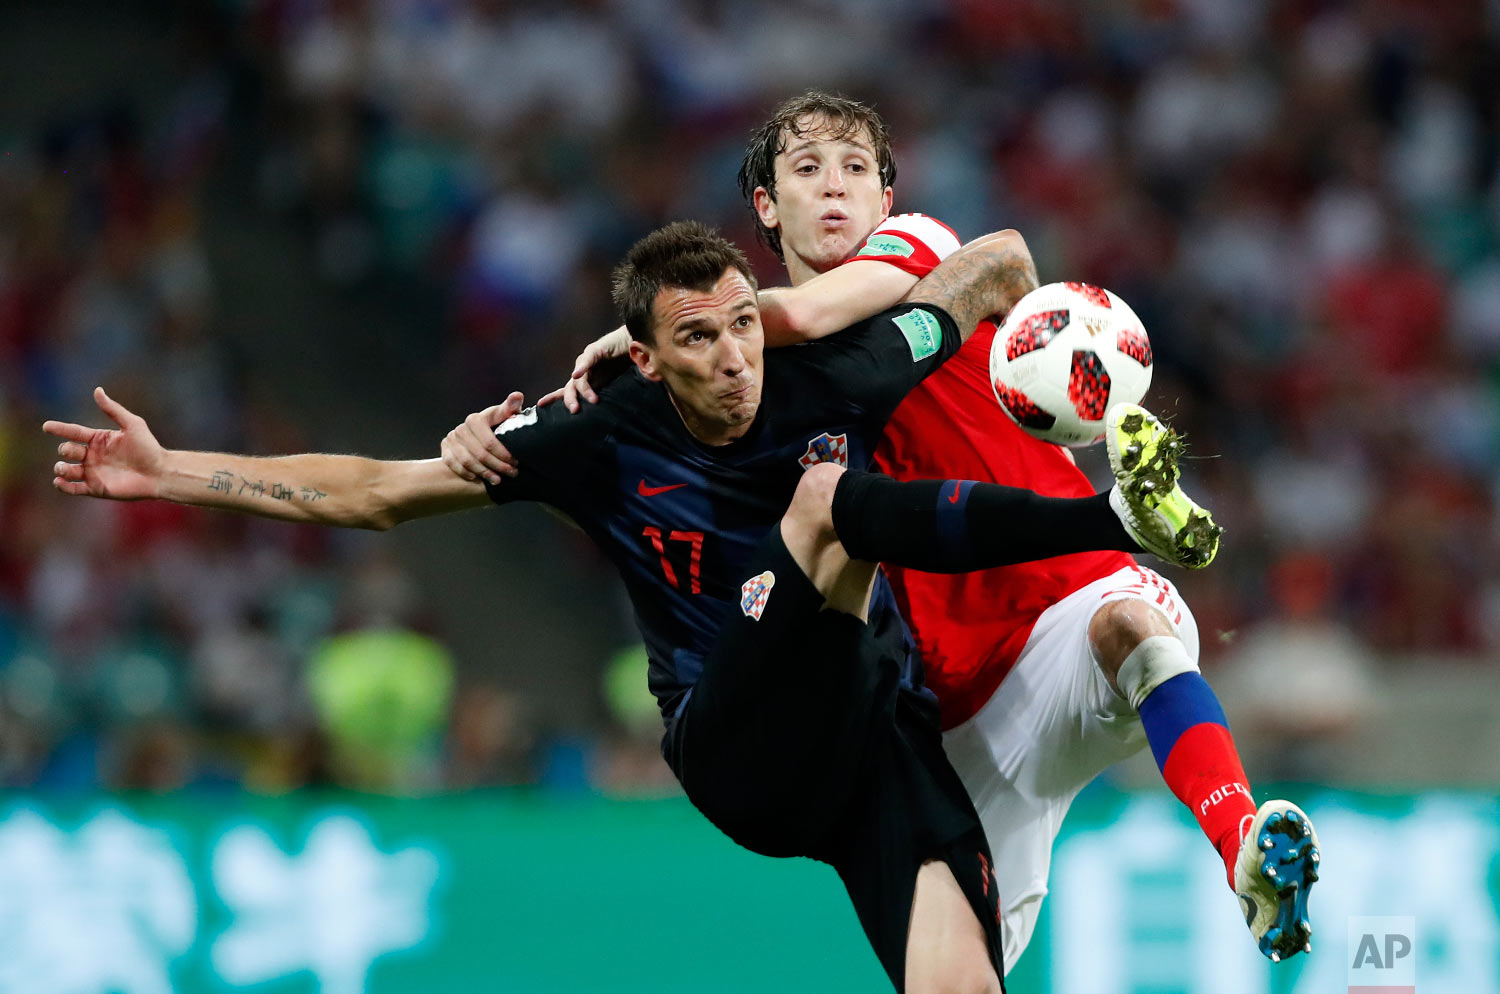  Croatia's Mario Mandzukic, left, challenges for the ball with Russia's Mario Fernandes during the quarterfinal match between Russia and Croatia at the 2018 soccer World Cup in the Fisht Stadium, in Sochi, Russia, Saturday, July 7, 2018. (AP Photo/Re